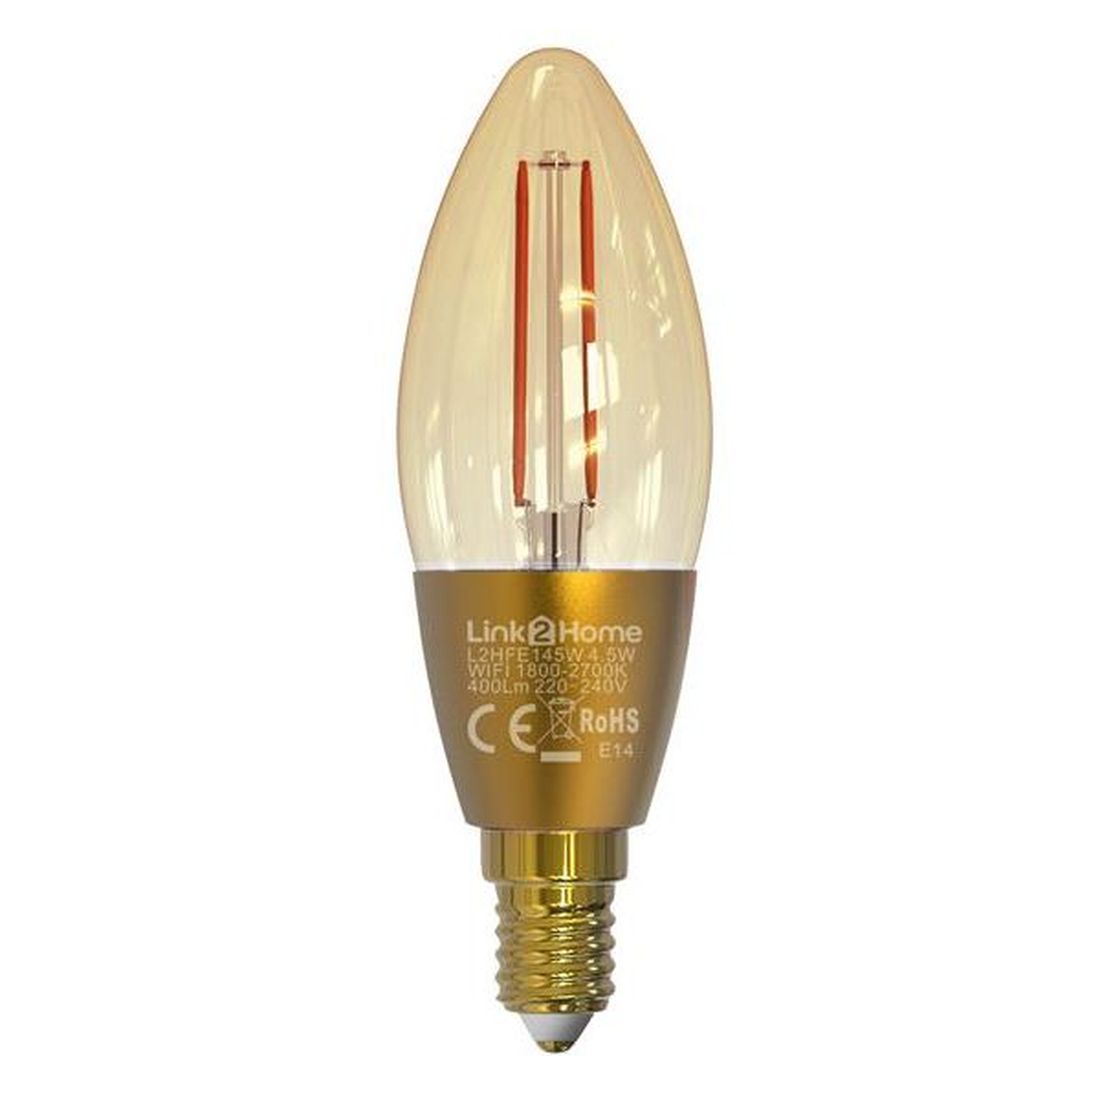 Link2Home Wi-Fi LED SES (E14) Candle Filament Dimmable Bulb, White 400 lm 4.5W            